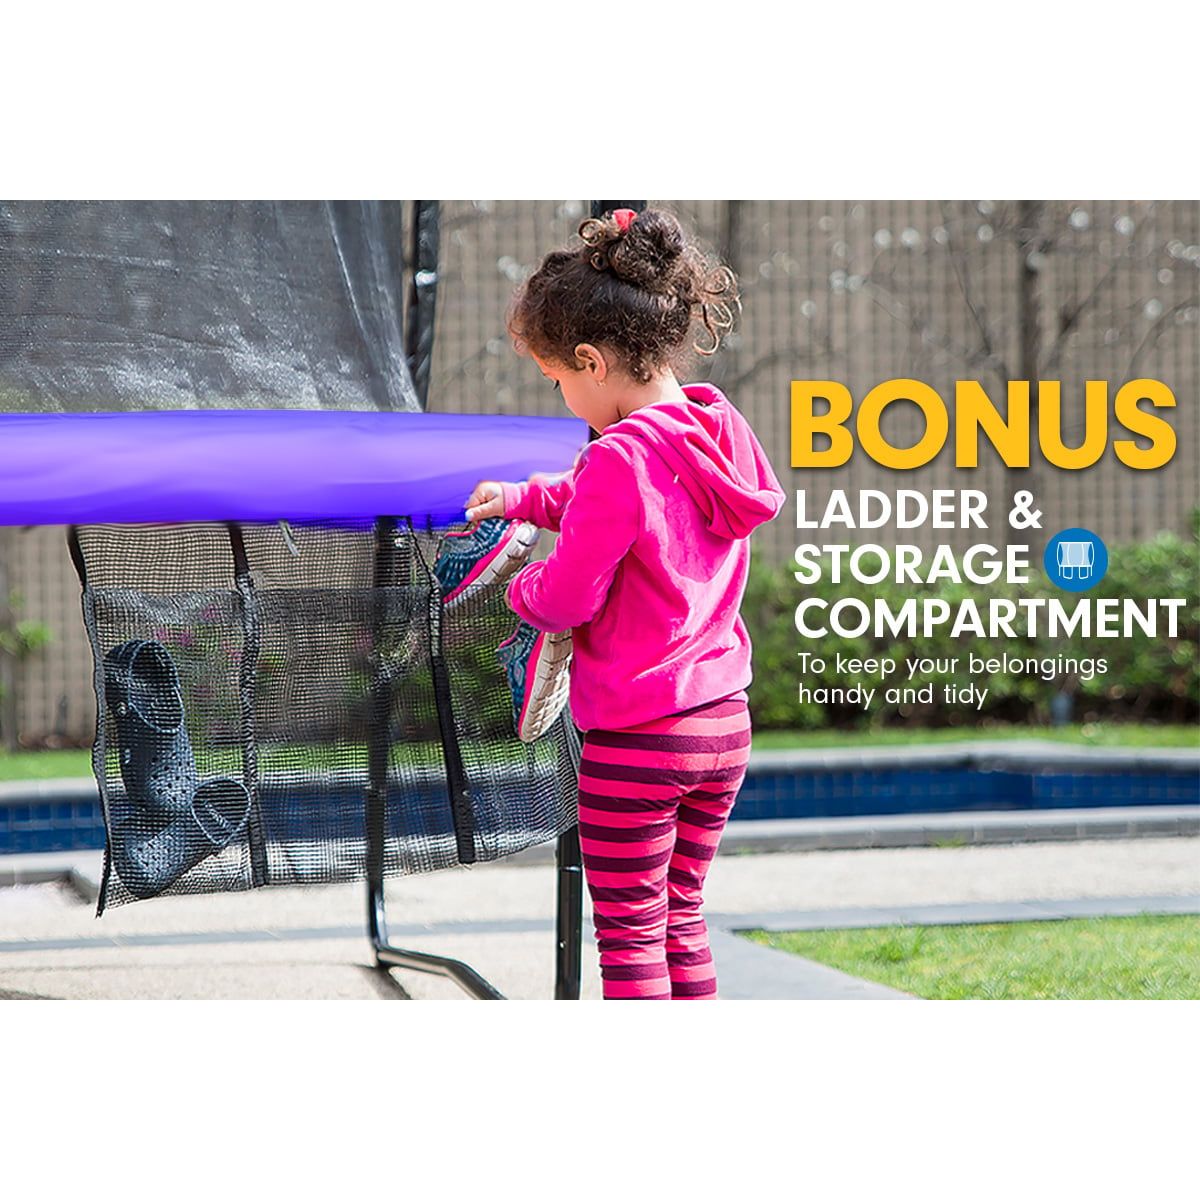 Kahuna 8ft Trampoline Free Ladder Spring Mat Net Safety Pad Cover Round Enclosure Purple